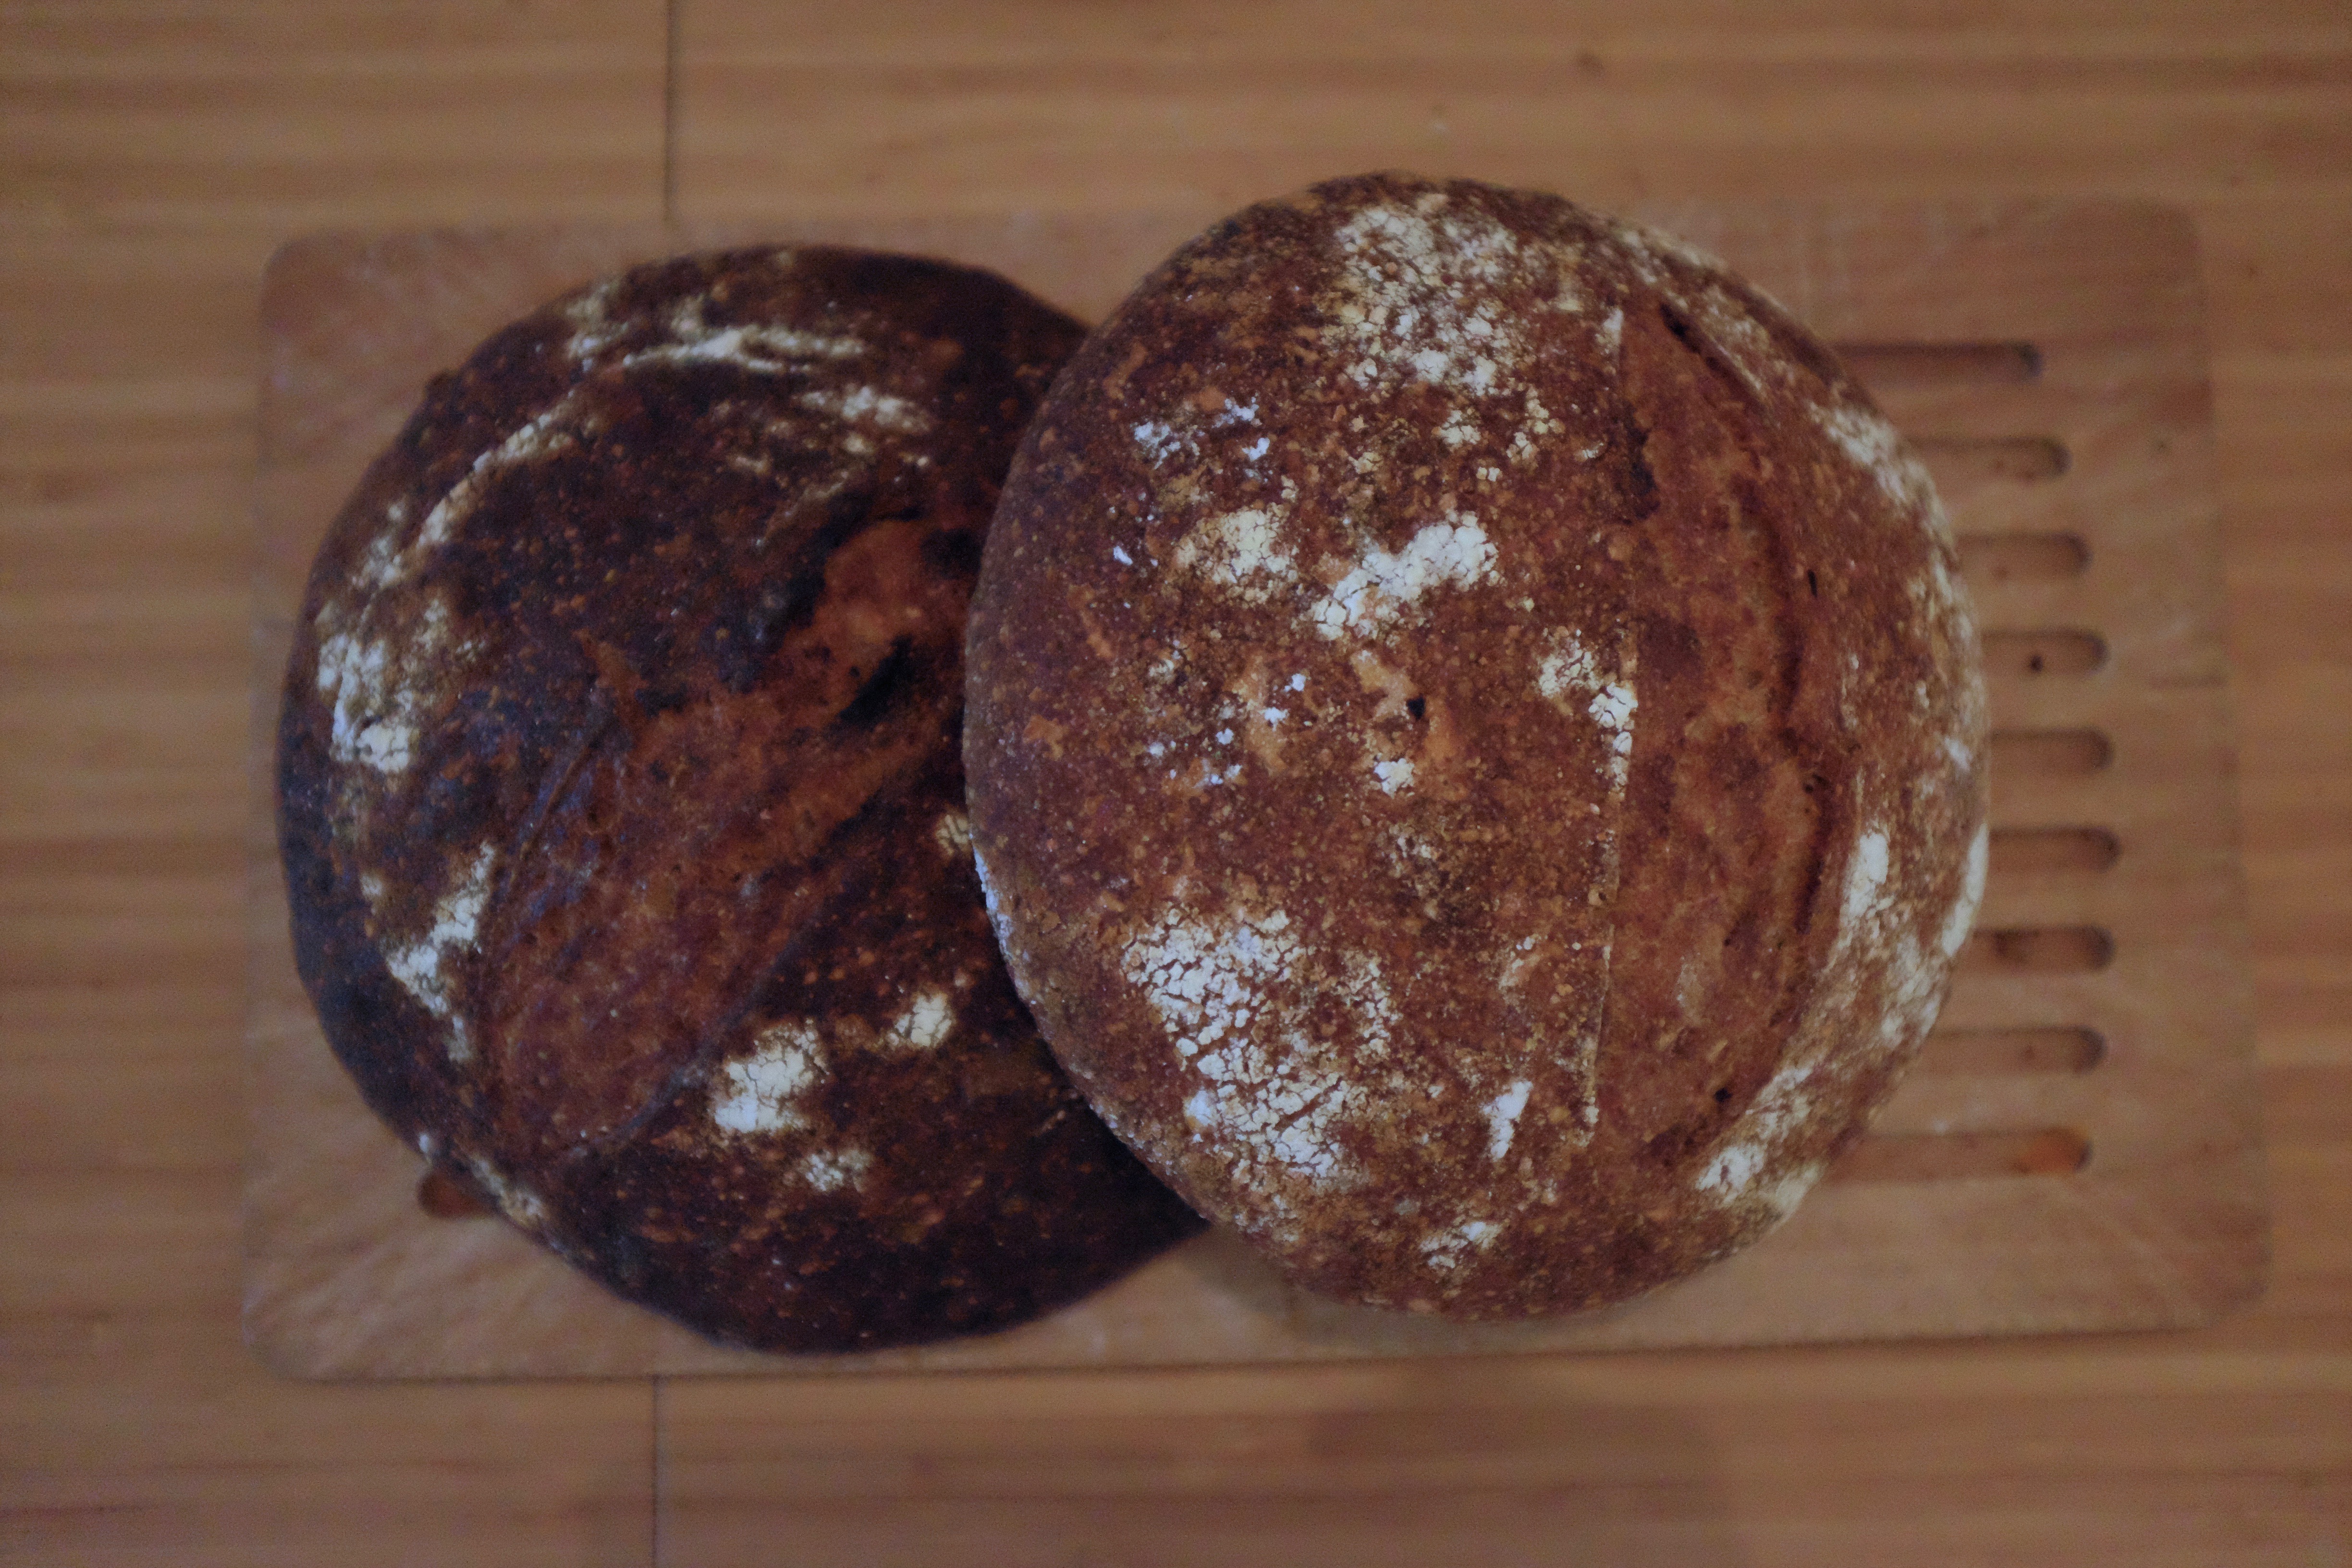 An image of a bread called “Old Wholemeal Sourdough”